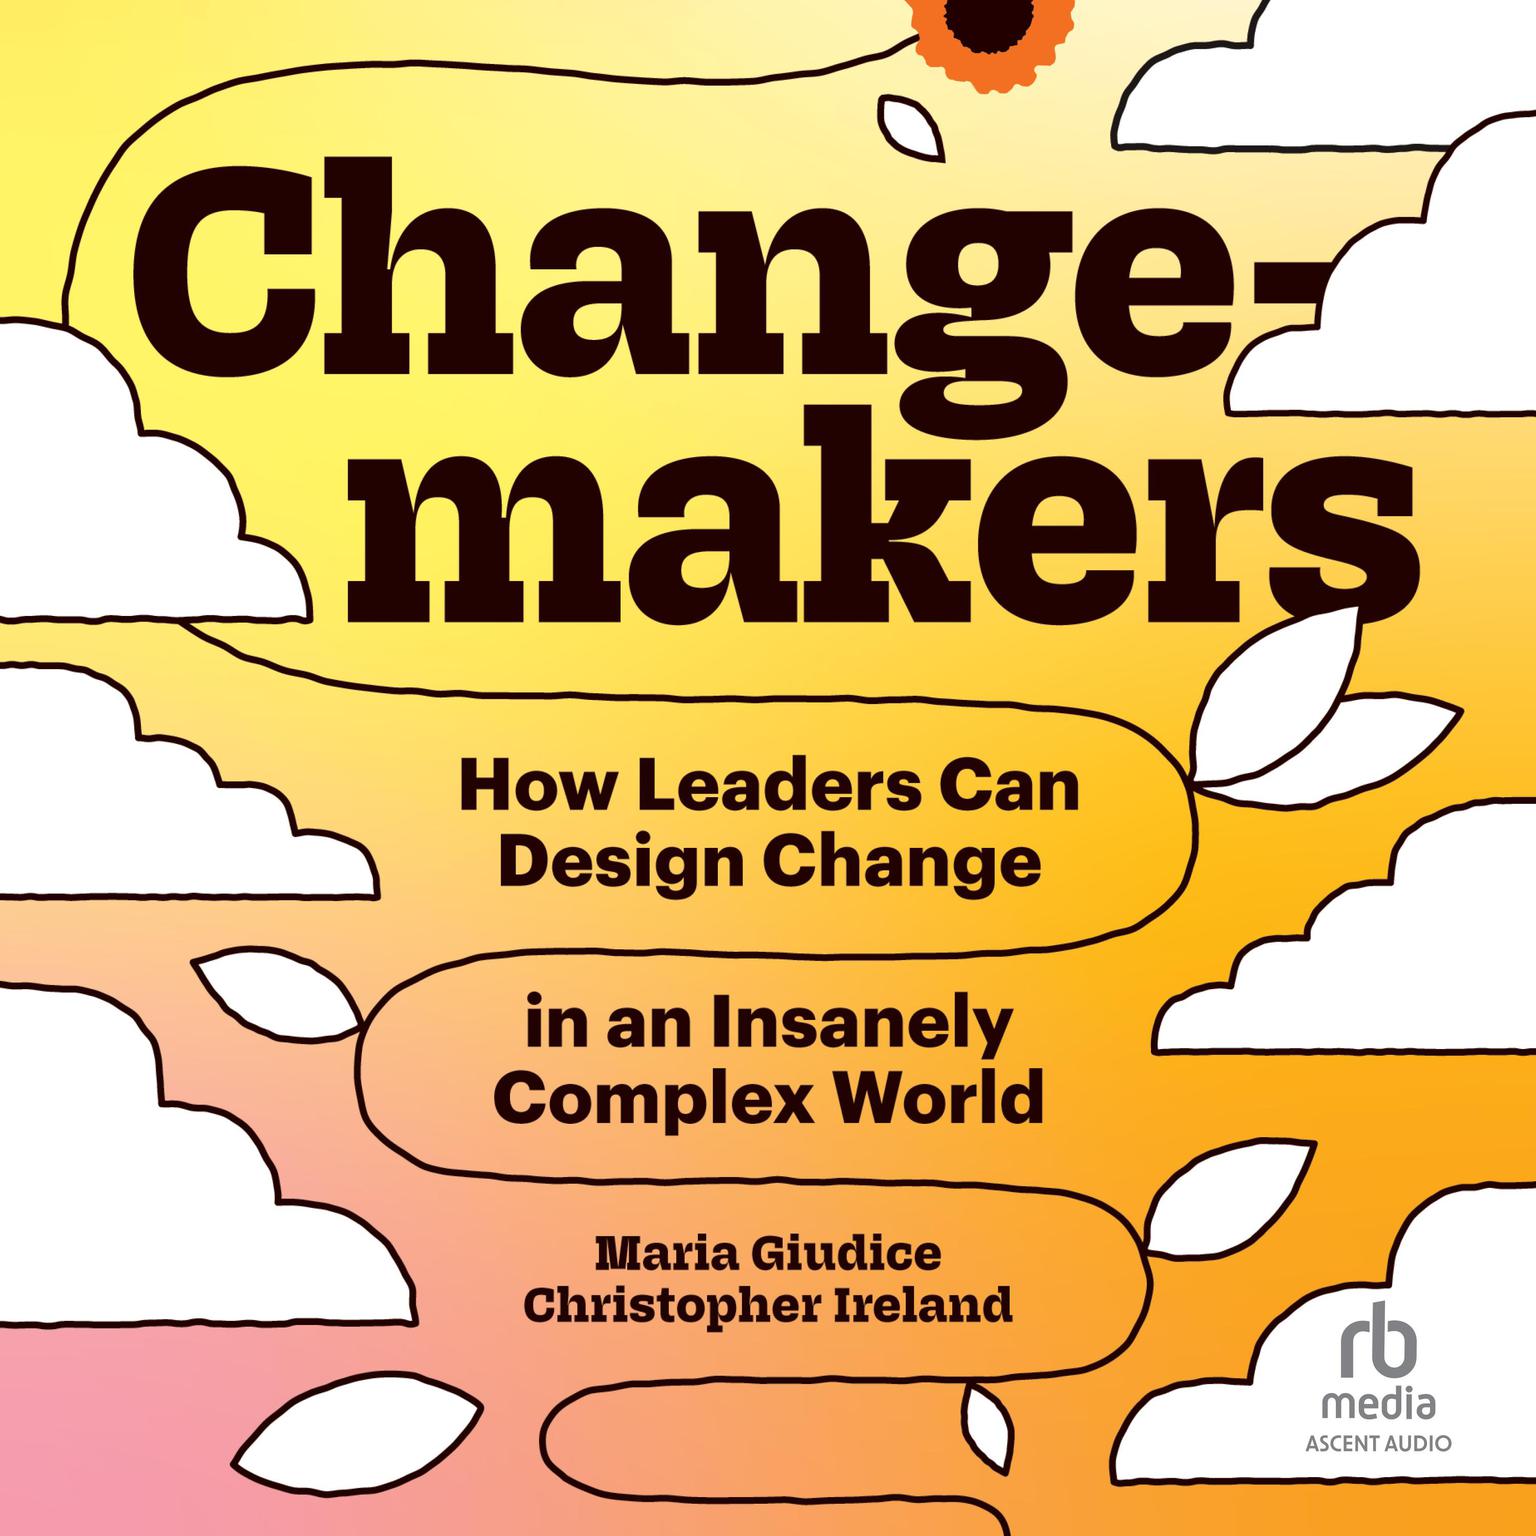 Changemakers: How Leaders Can Design Change in an Insanely Complex World Audiobook, by Maria Giuduce